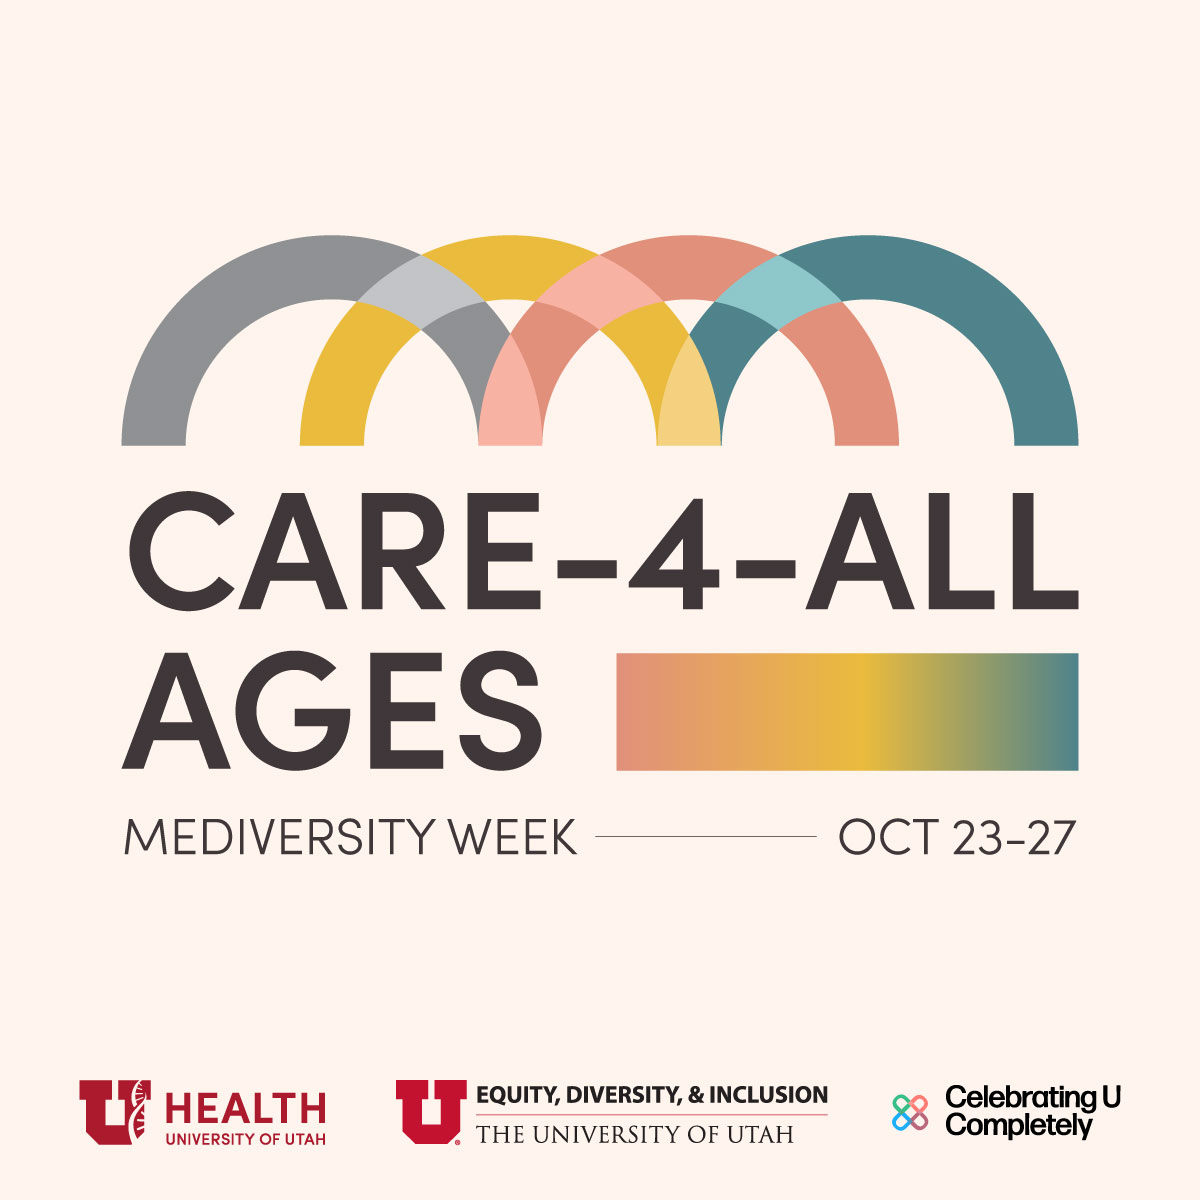 Care-4-All Ages, MEDiversity Week